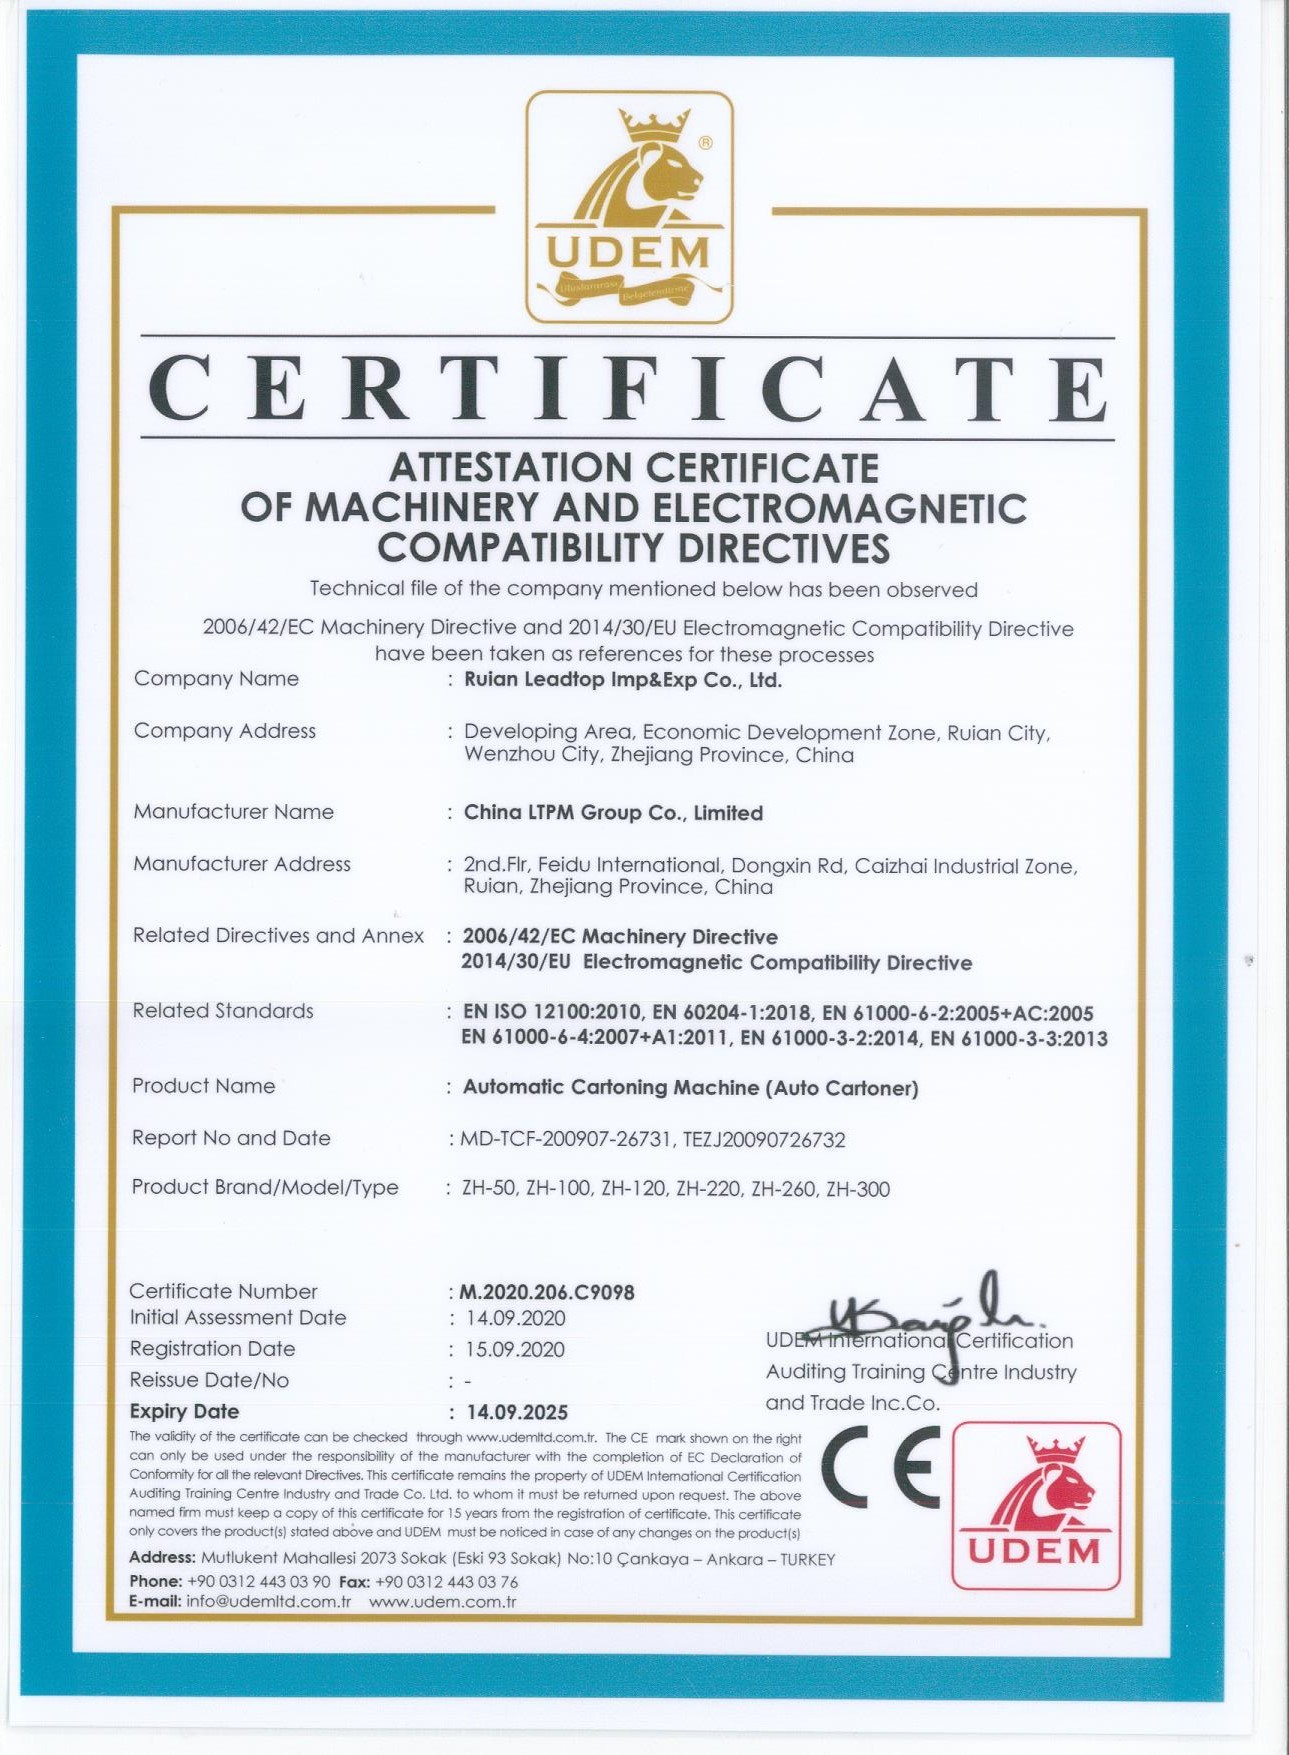 LeadTop Pharmaceutical Machinery Co., LTD Certifications